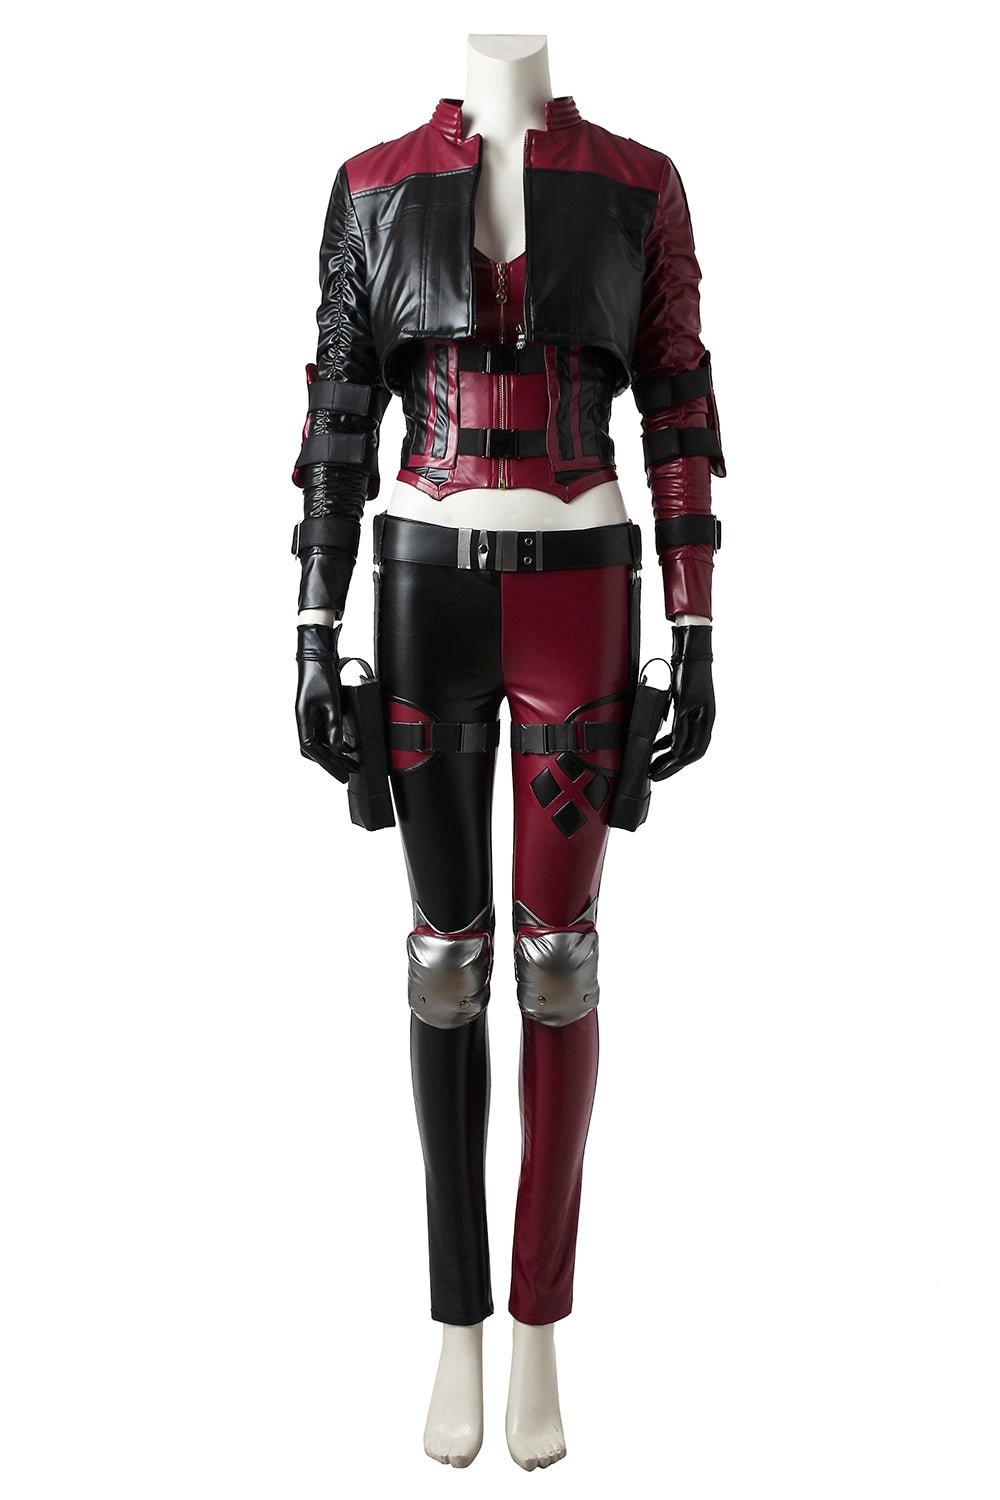 DC Injustice 2 Harley Quinn Cosplay Costume